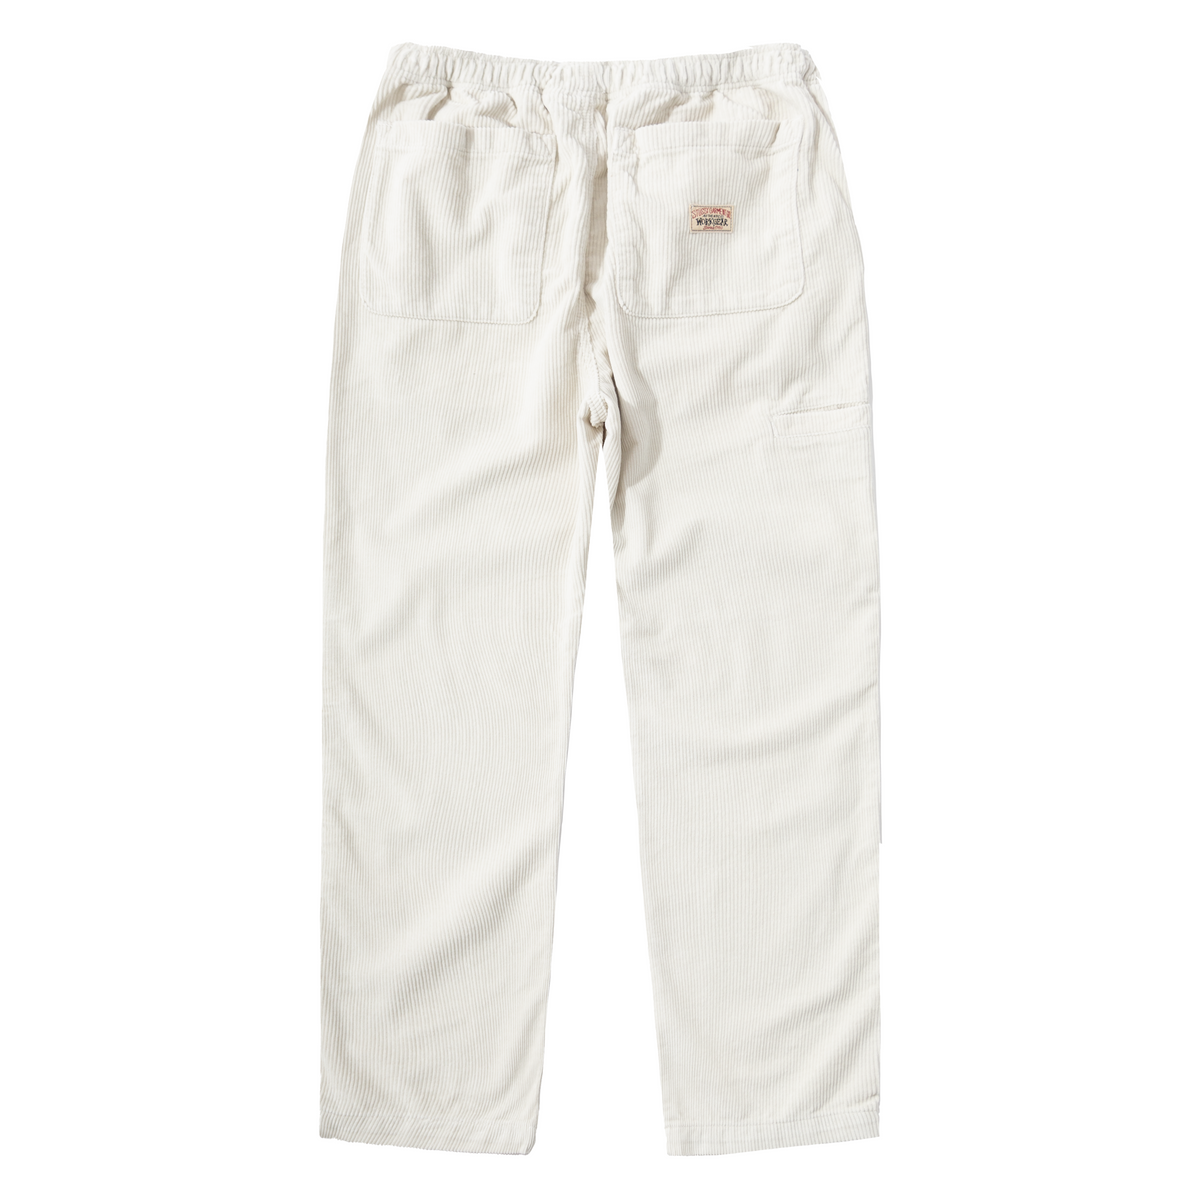 Shop Stüssy Wide Wale Cord Beach Pant Stussy and Save Big! Find